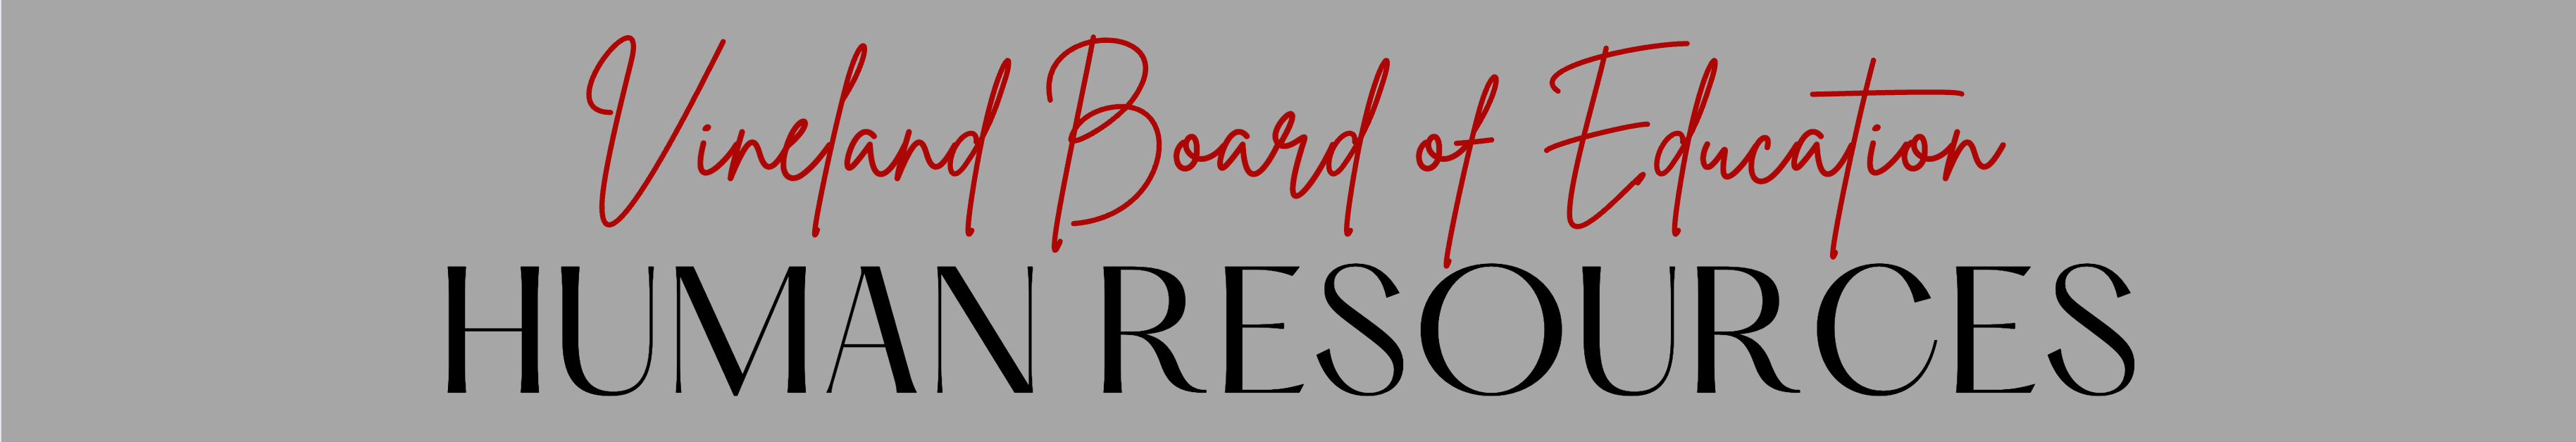 Vineland Board of Education - Human Resources